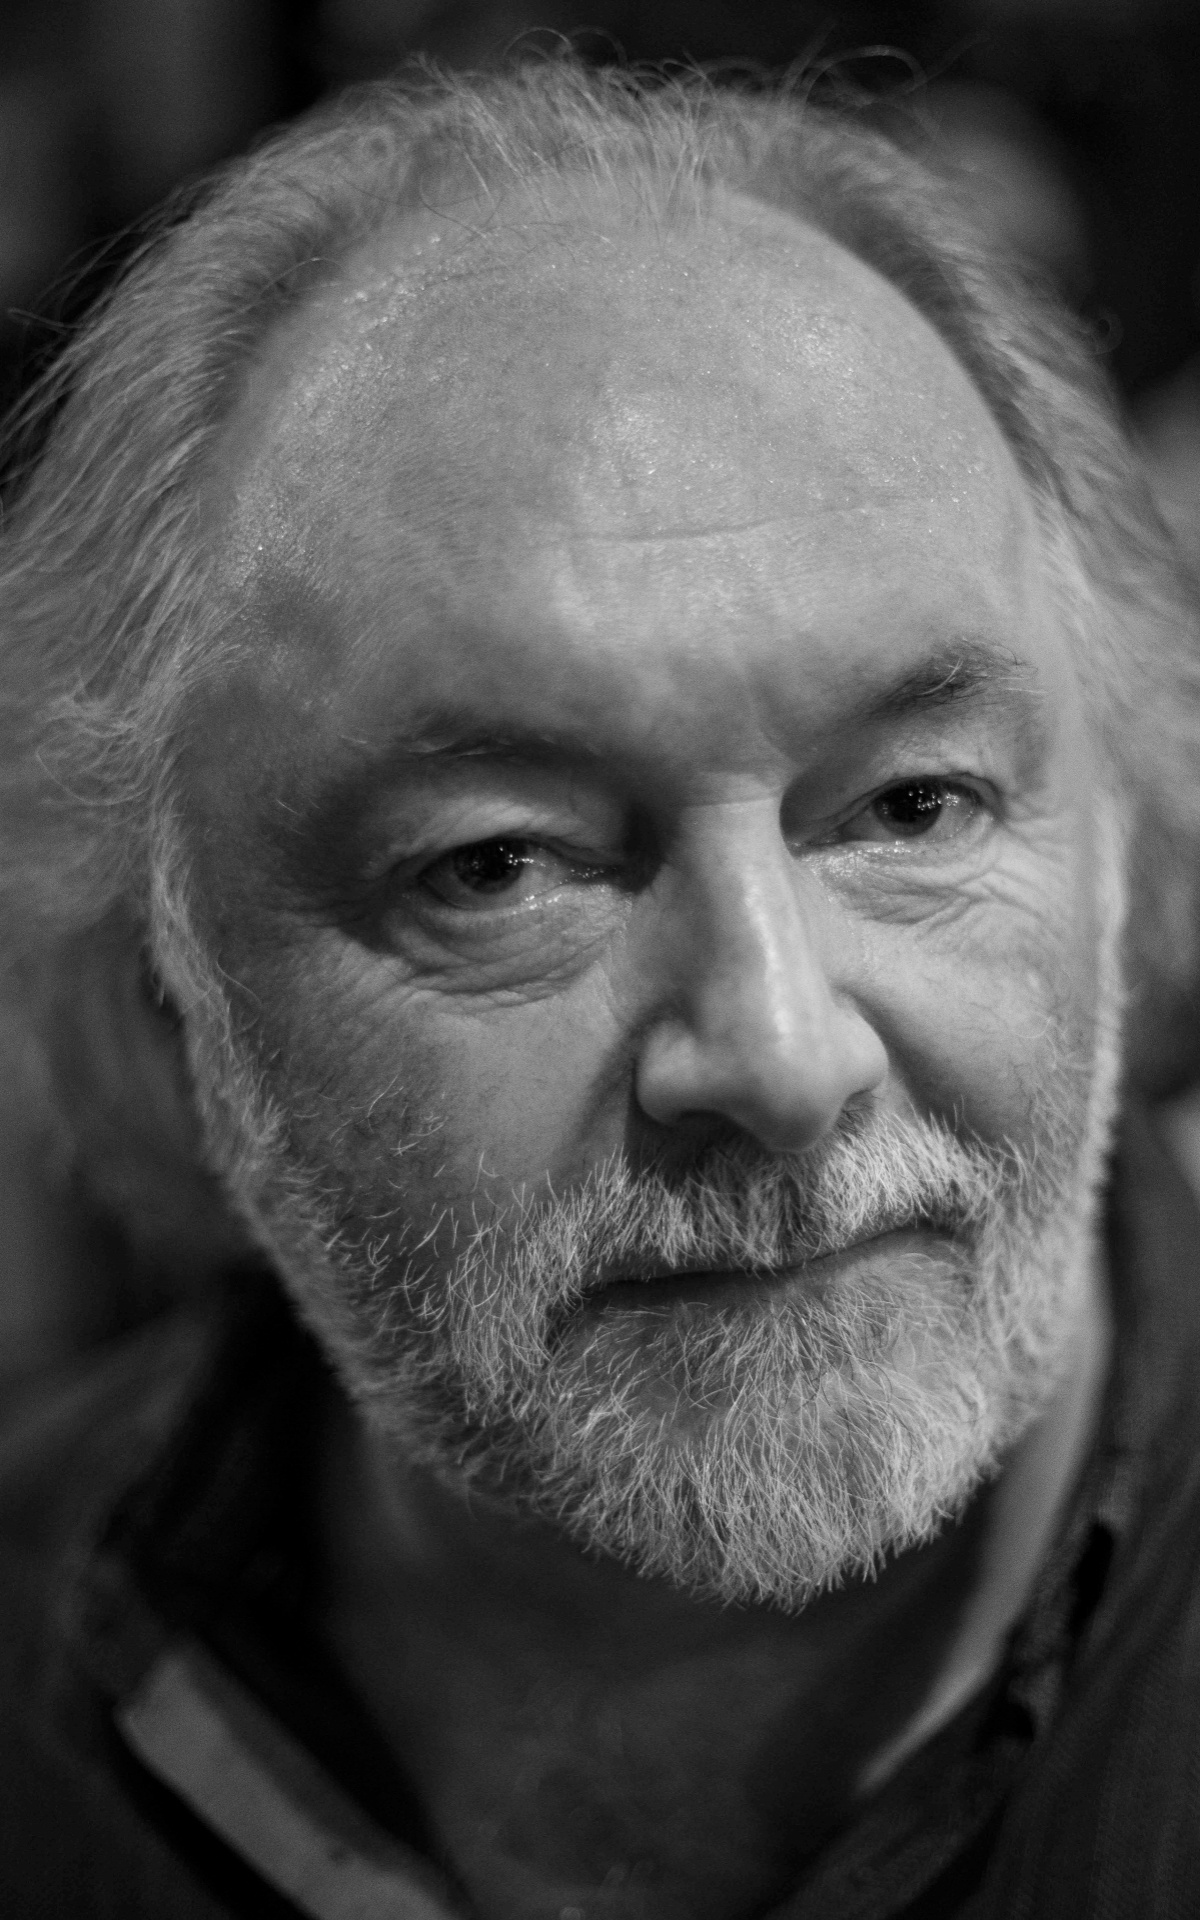 A black and white portrait photo of Chris.  He has a mid length white beard and dark shirt.